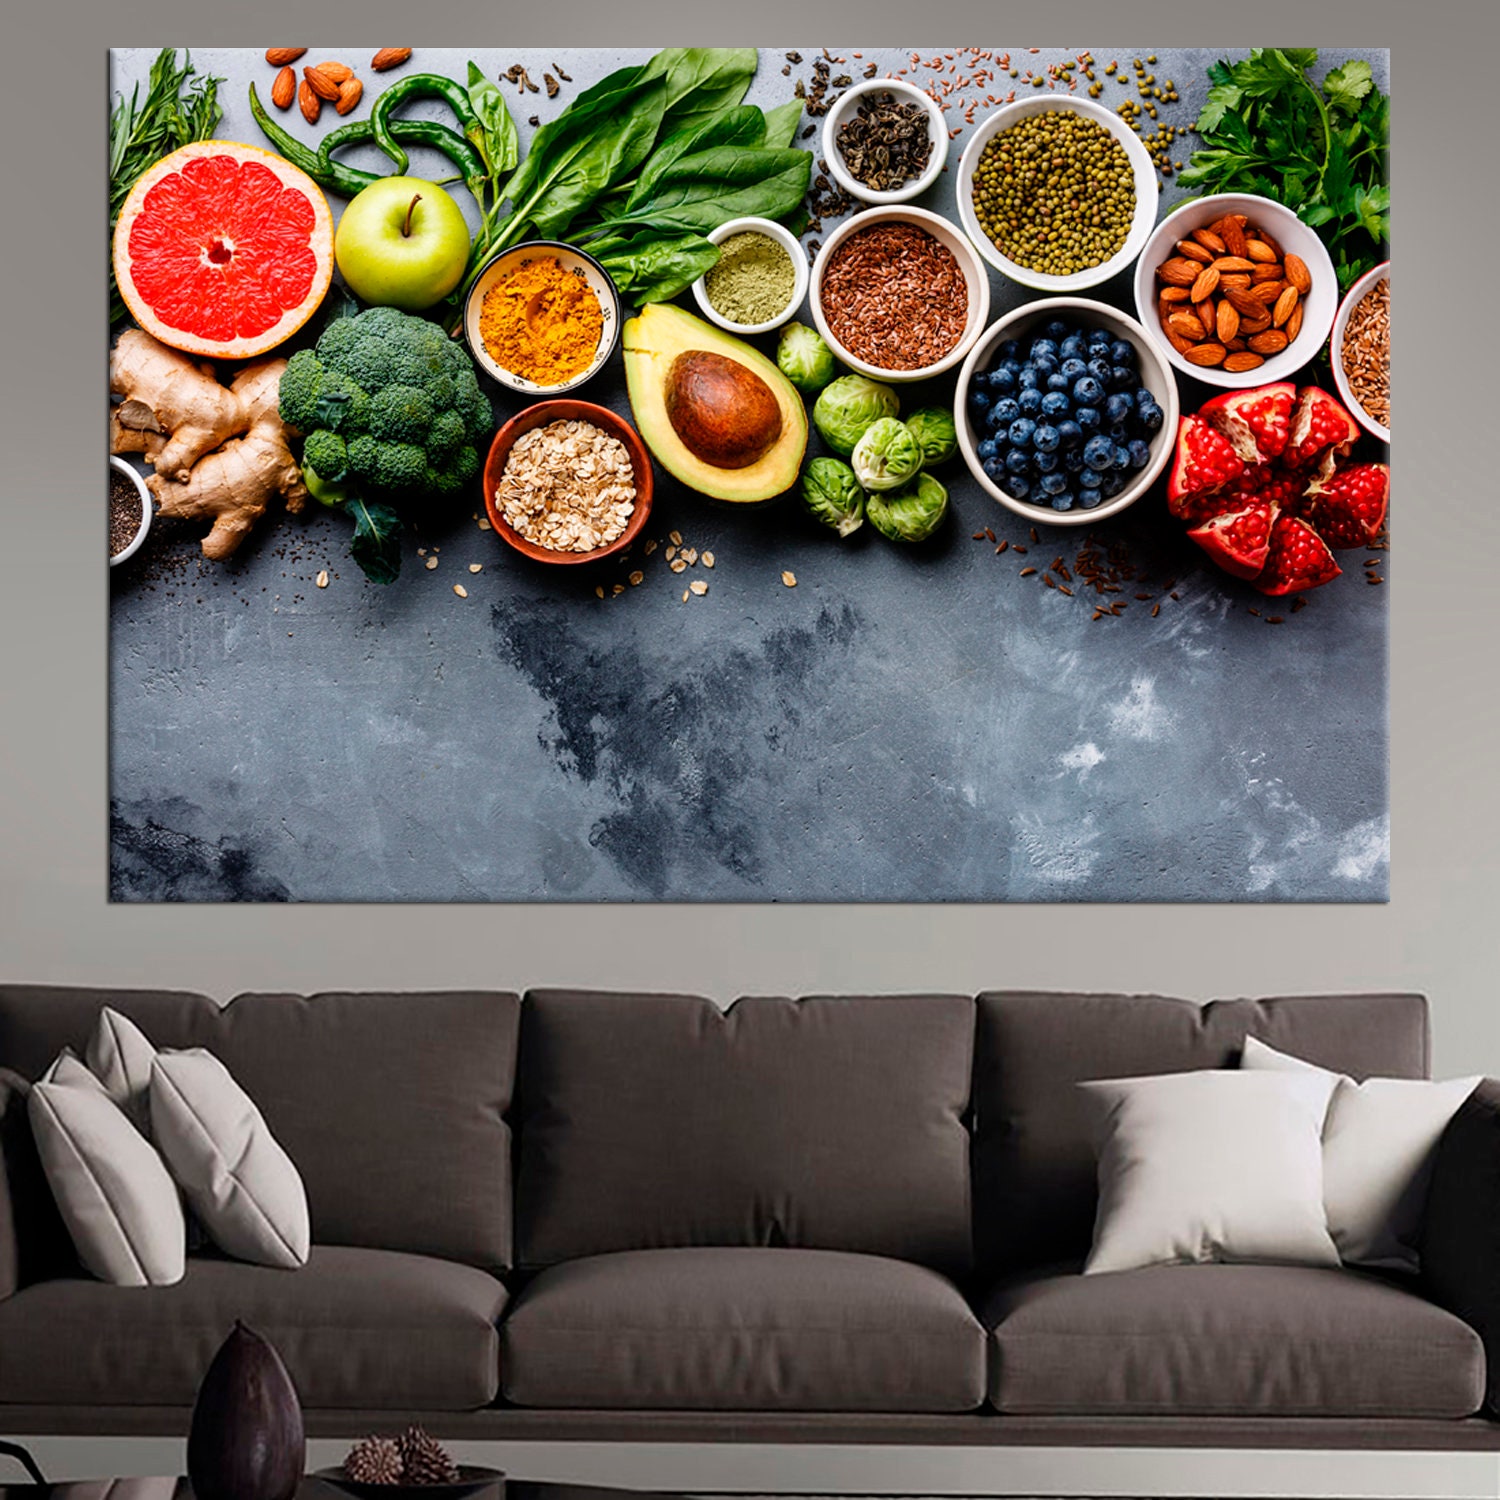 Healthy Vegetables Fruits Picture Canvas Print Painting Wall Art Kitchen Decor